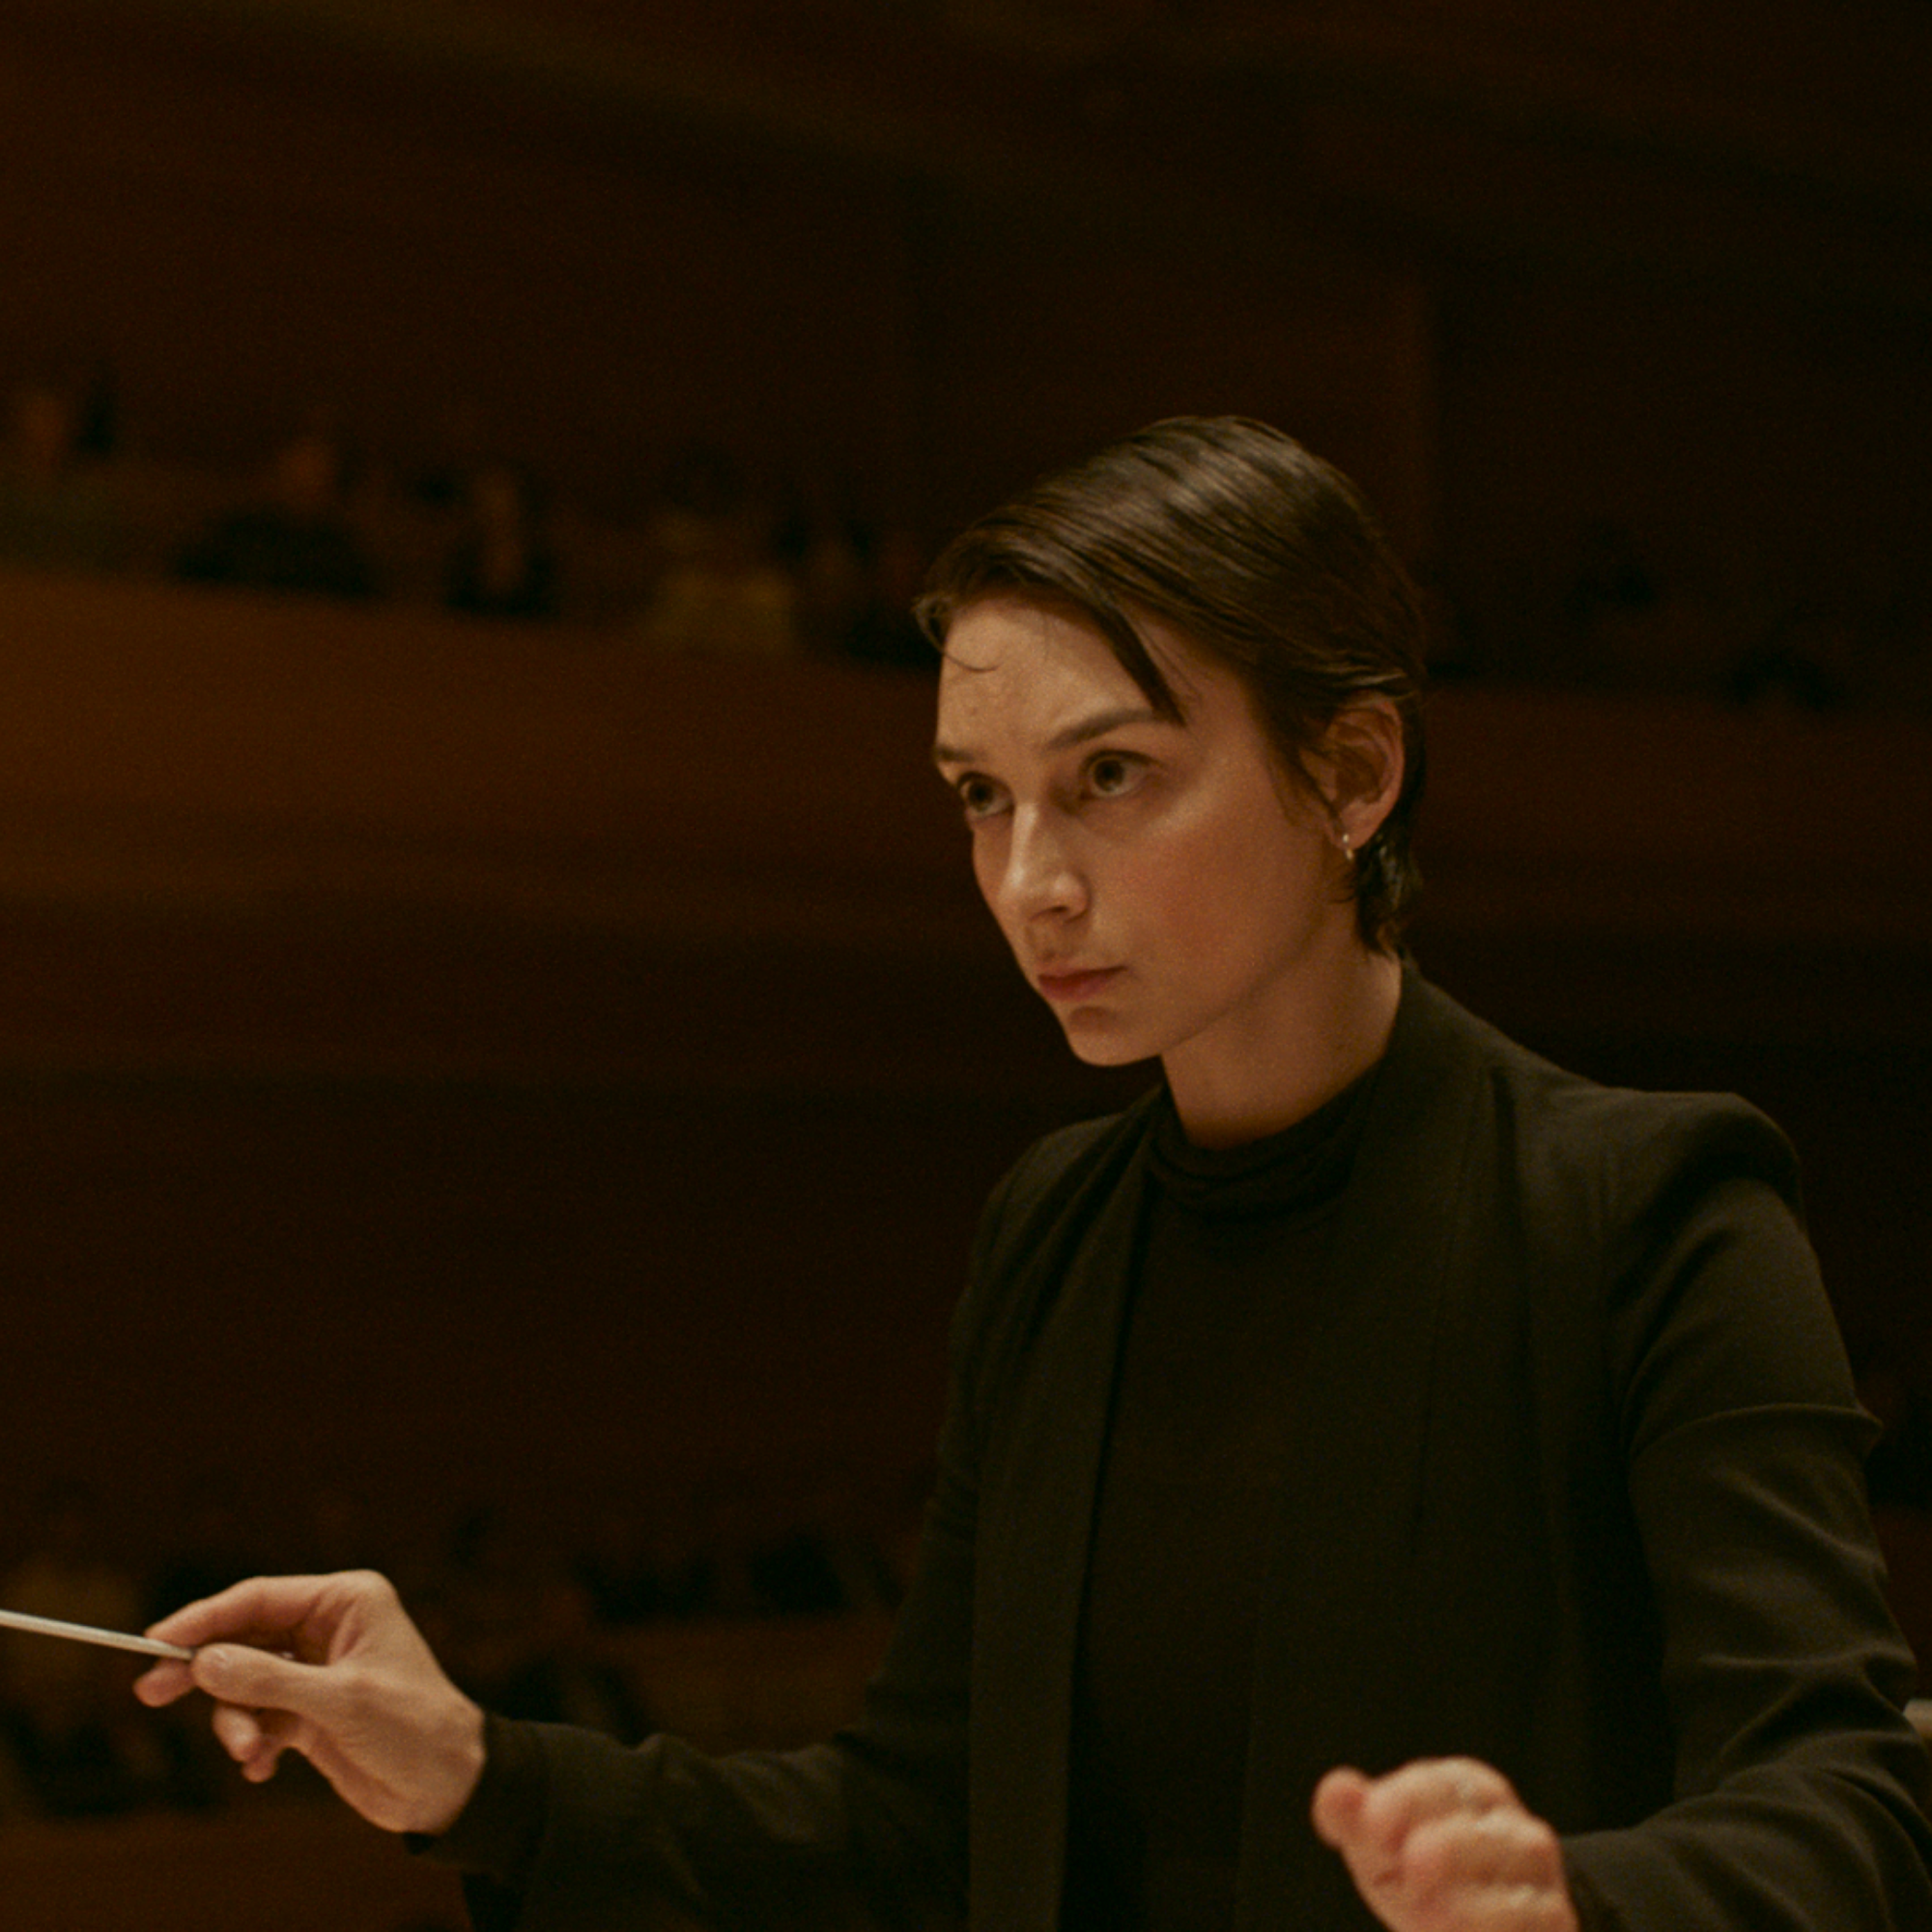 A woman stands holding a conductor's baton, an audience out of focus in the background.